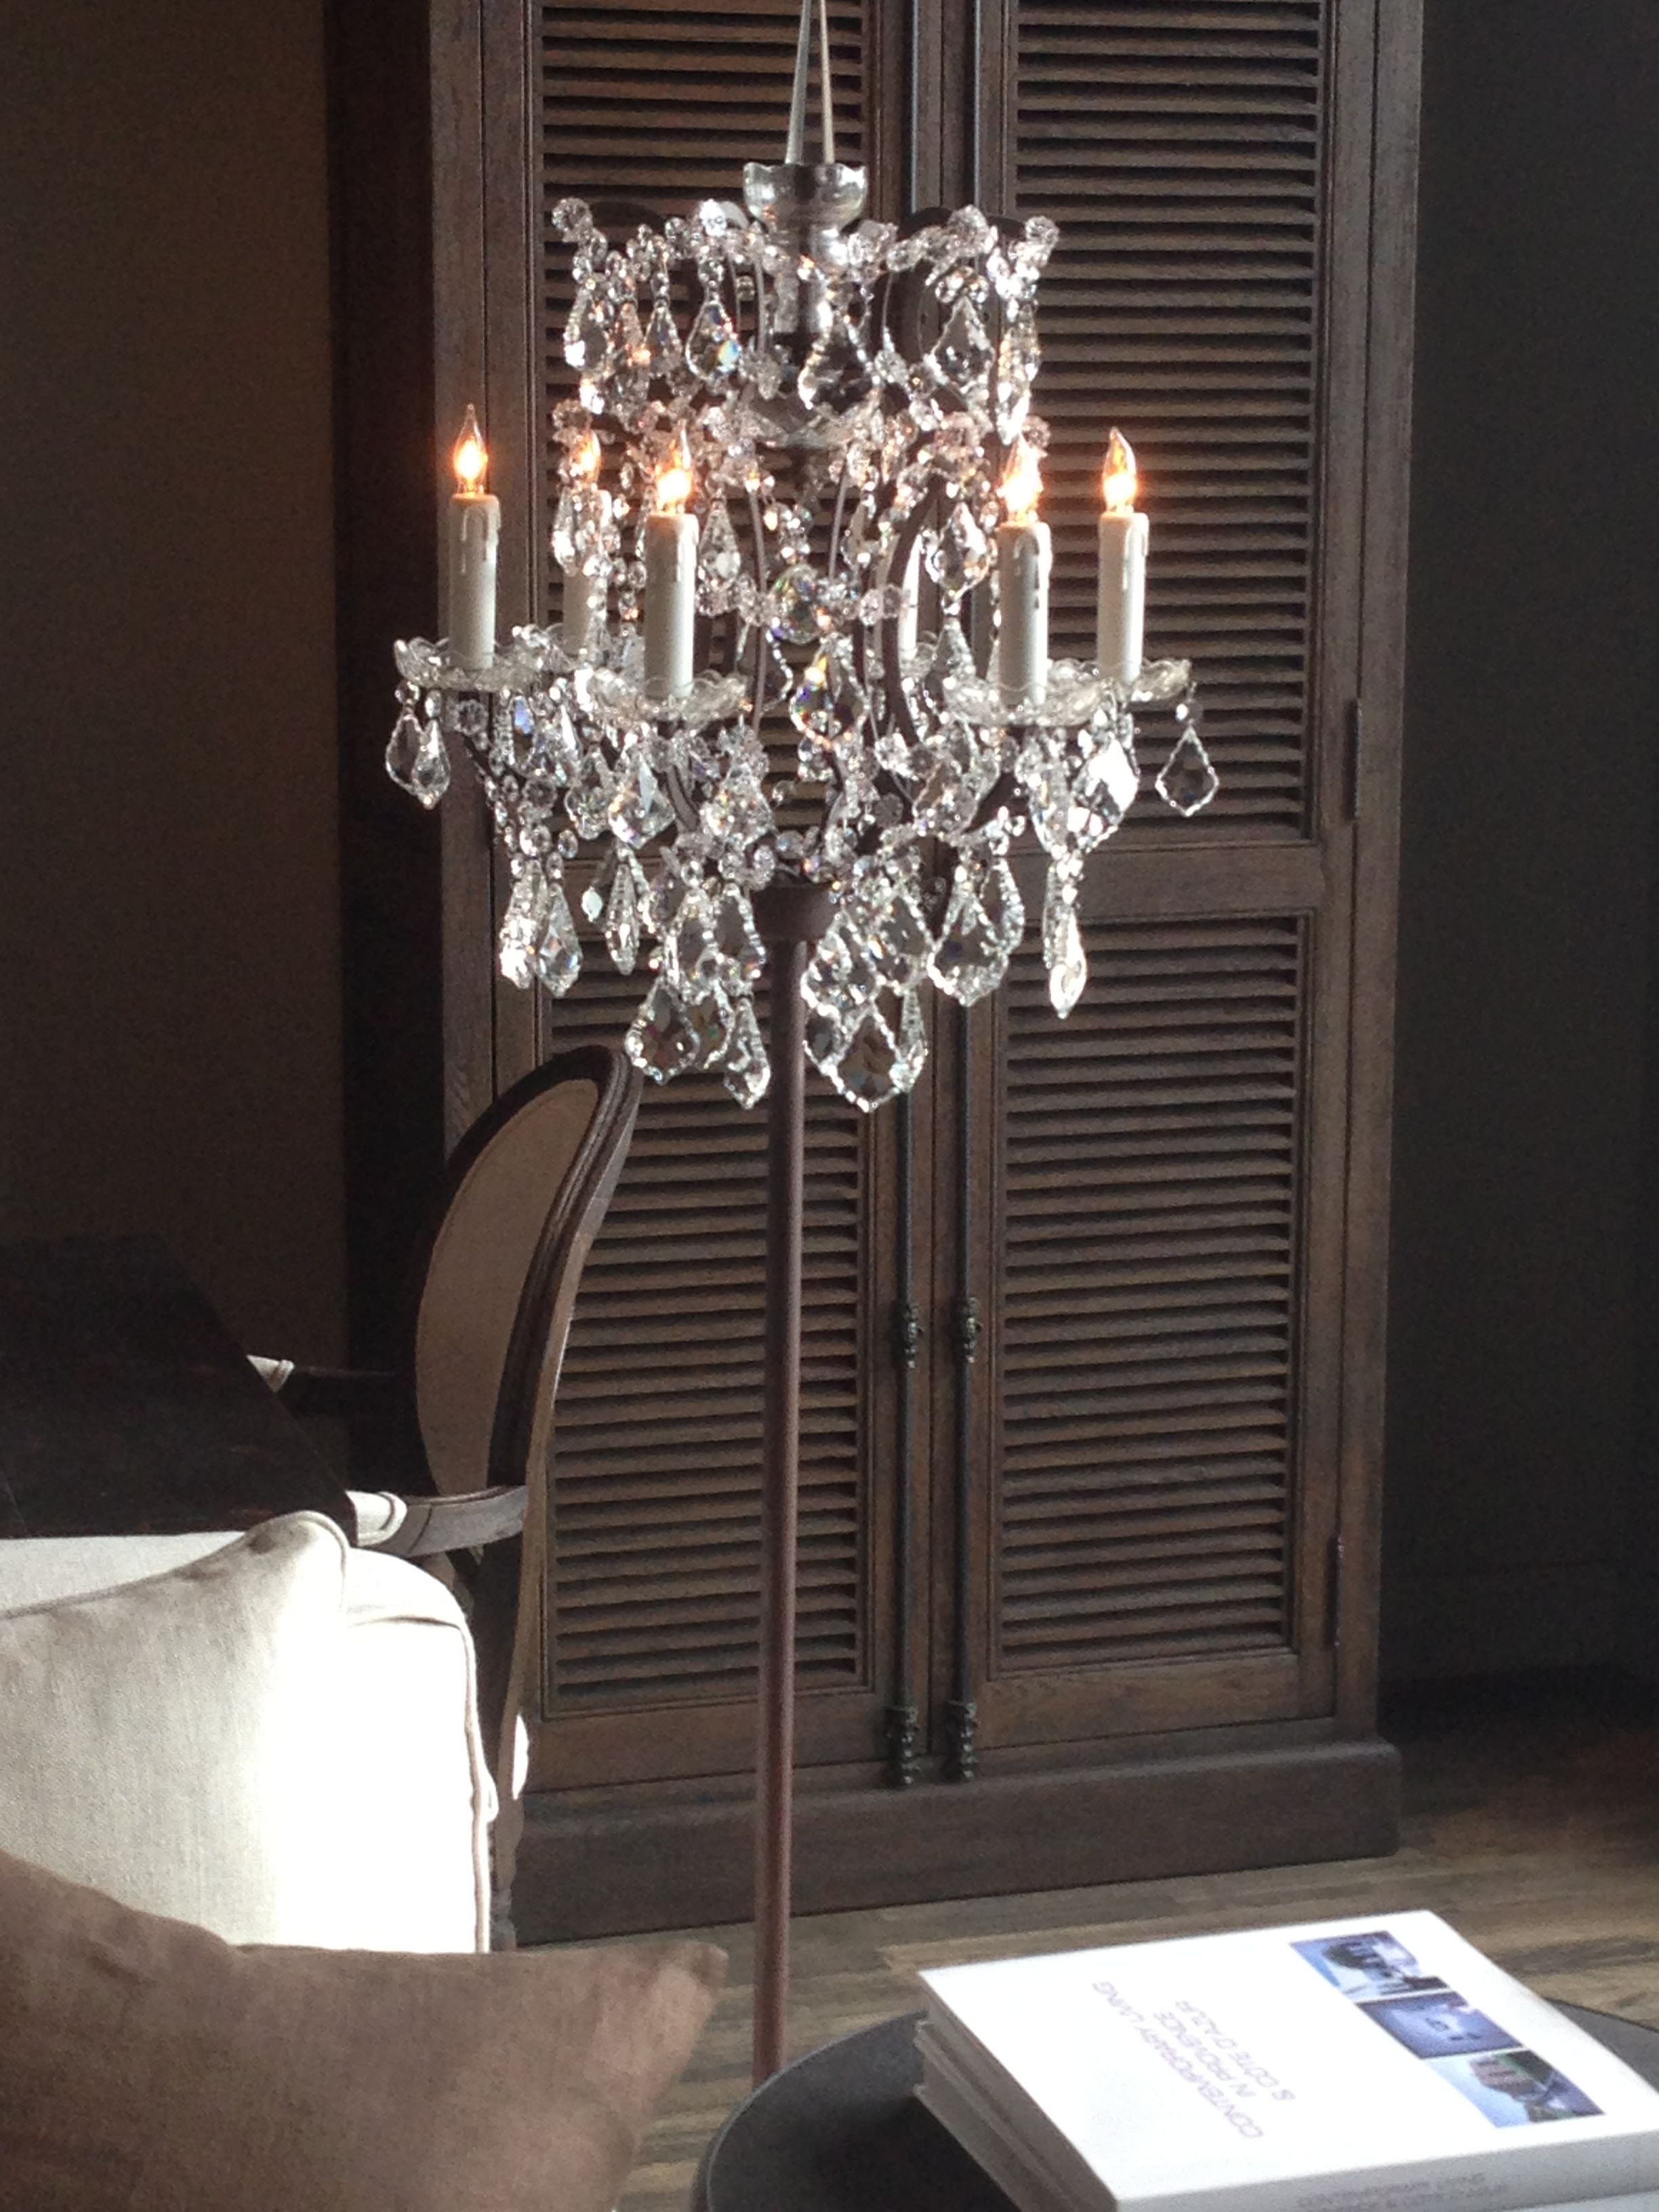 Chandelier Floor Lamp I Own This Floor Lamp And It Is So in size 2448 X 3264